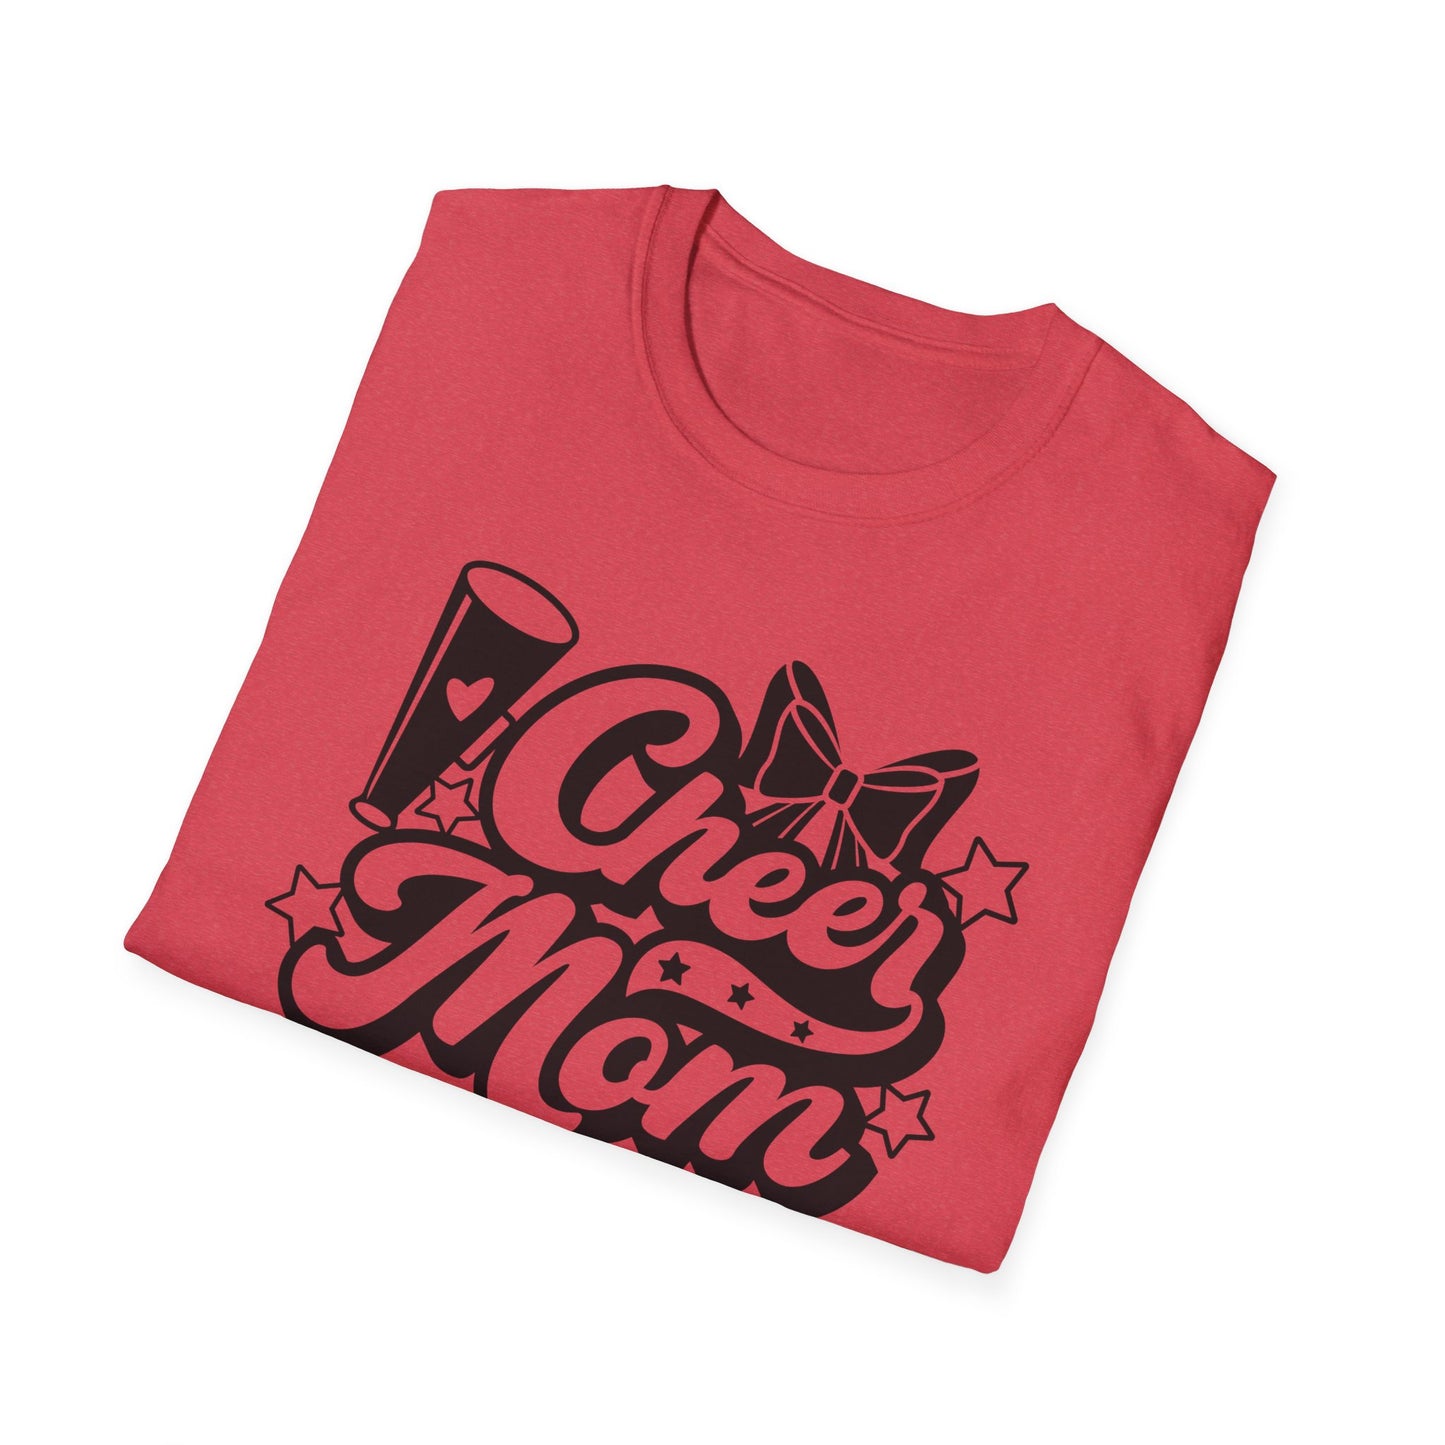 Vintage Cheer Mom - Unisex Softstyle T-Shirt